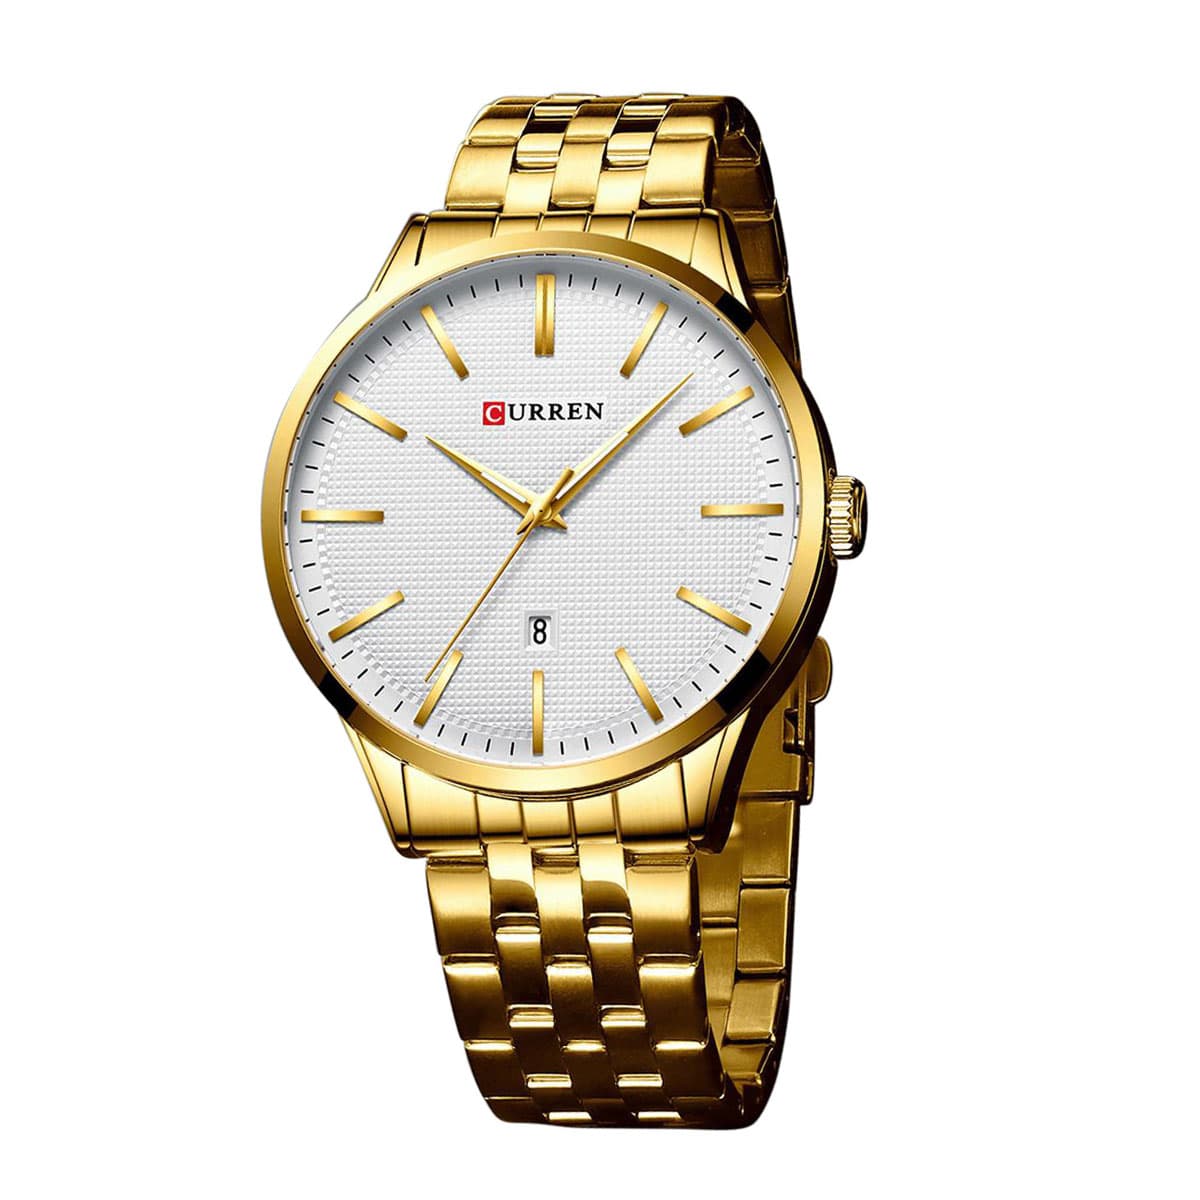 Golden Color Watches - Boys Brand Watches - Boys Girls Brand Watches Collection Images - Brand watches - NeotericIT.com